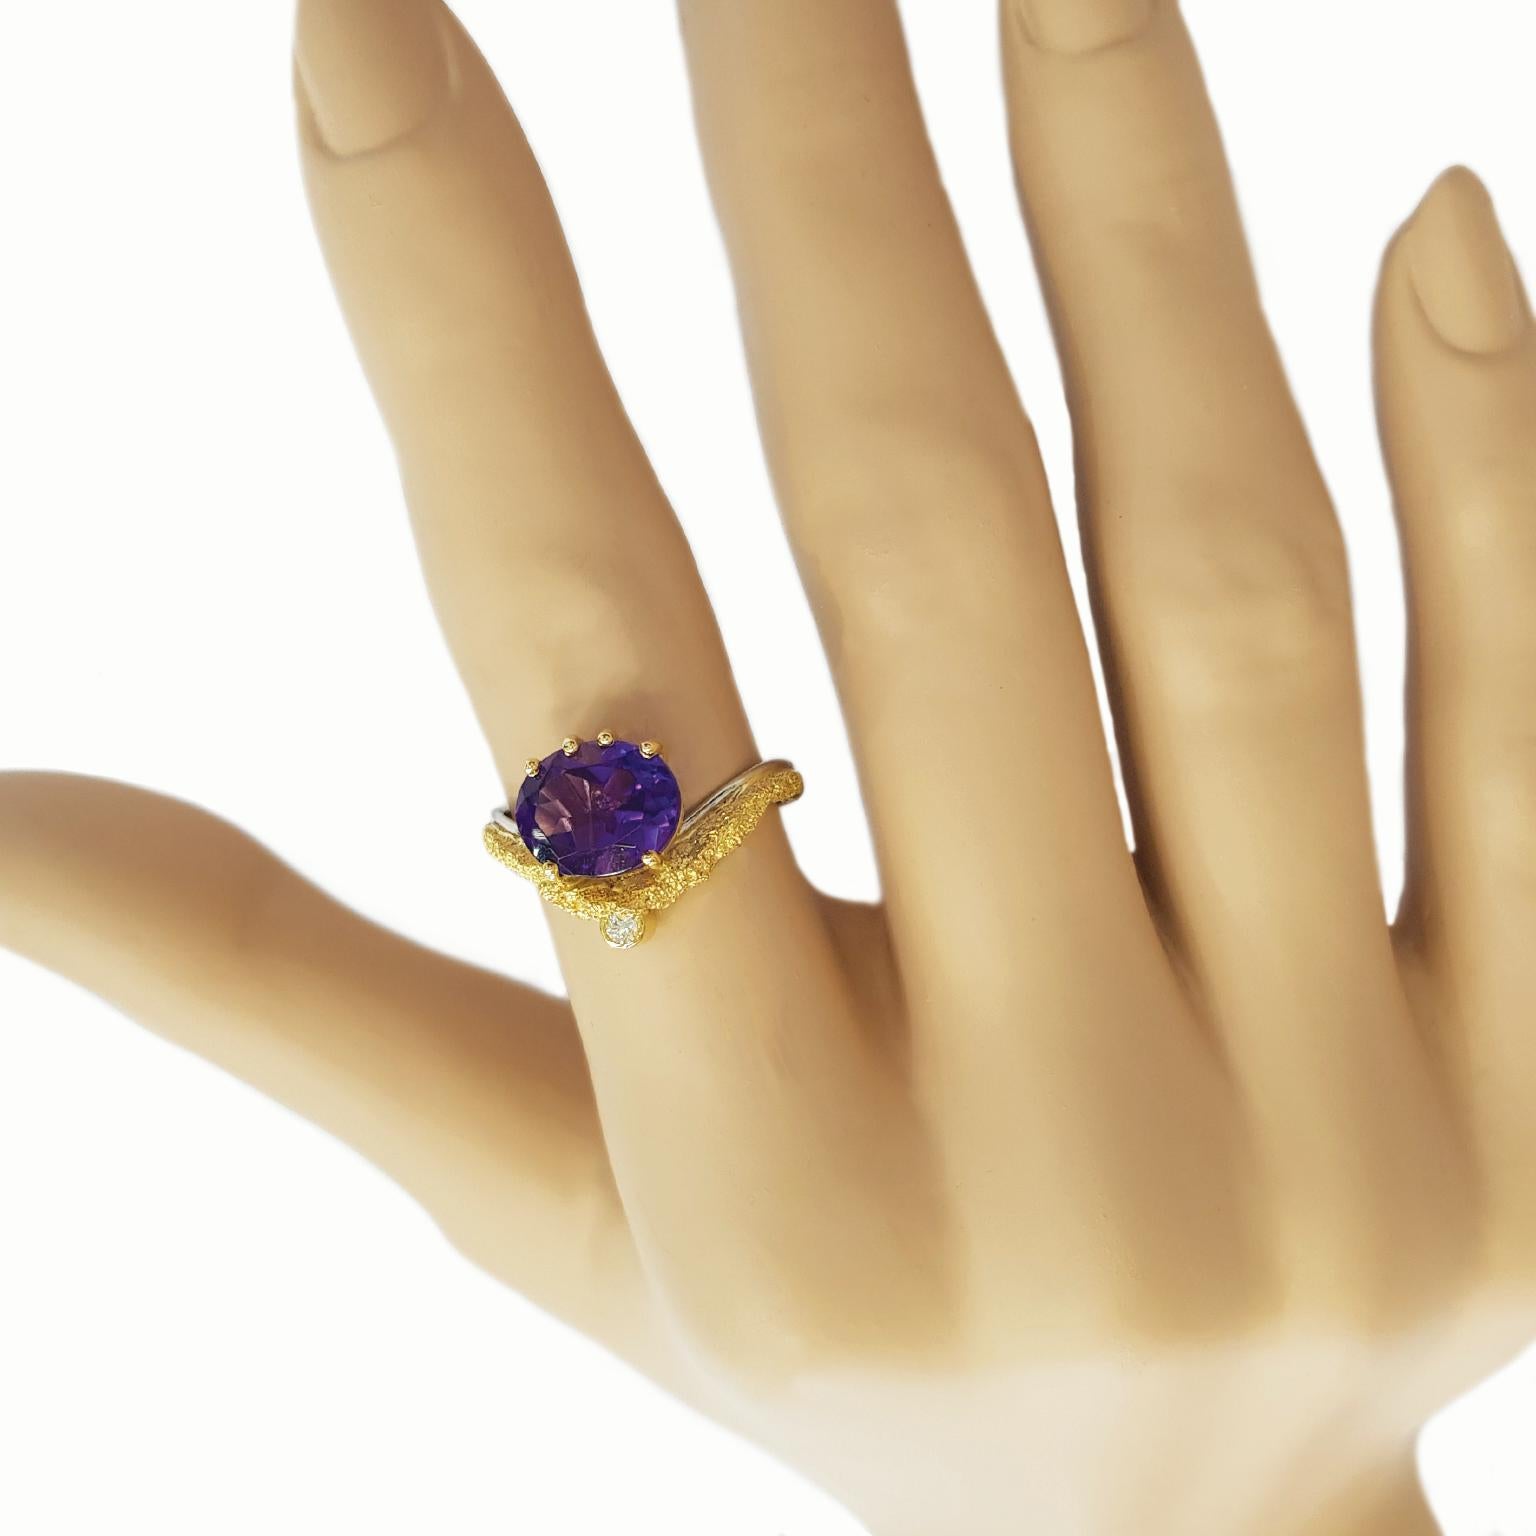 Paul Amey 18K Gold, Platinum, Amethyst and Diamond Ring In New Condition For Sale In Tewantin, Queensland